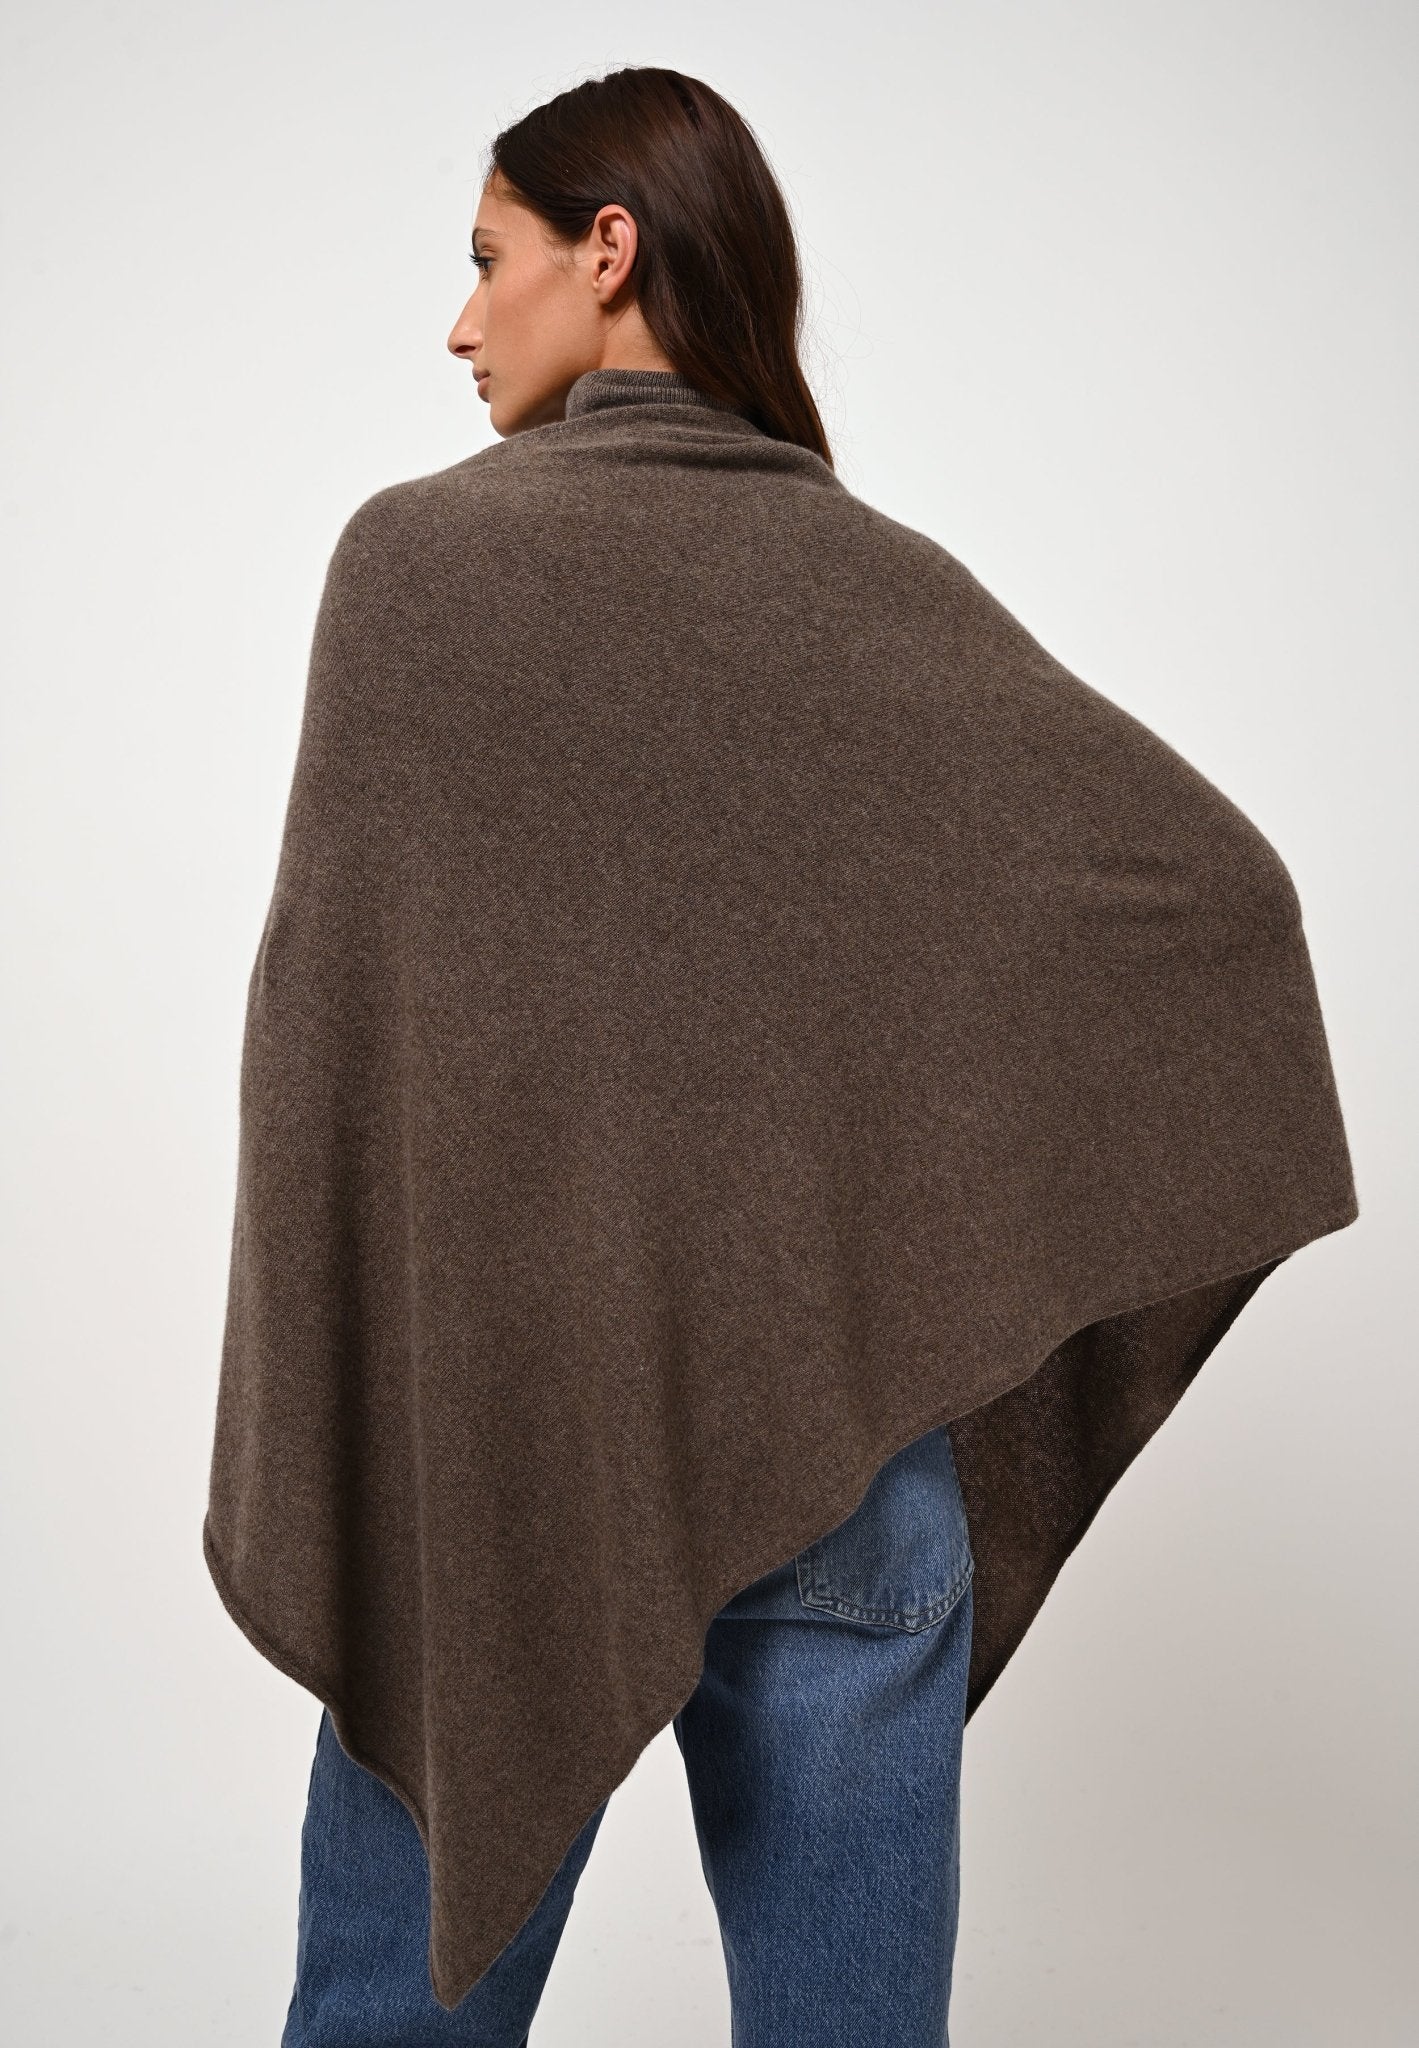 CARRA poncho taupe chiné 100% cachemire